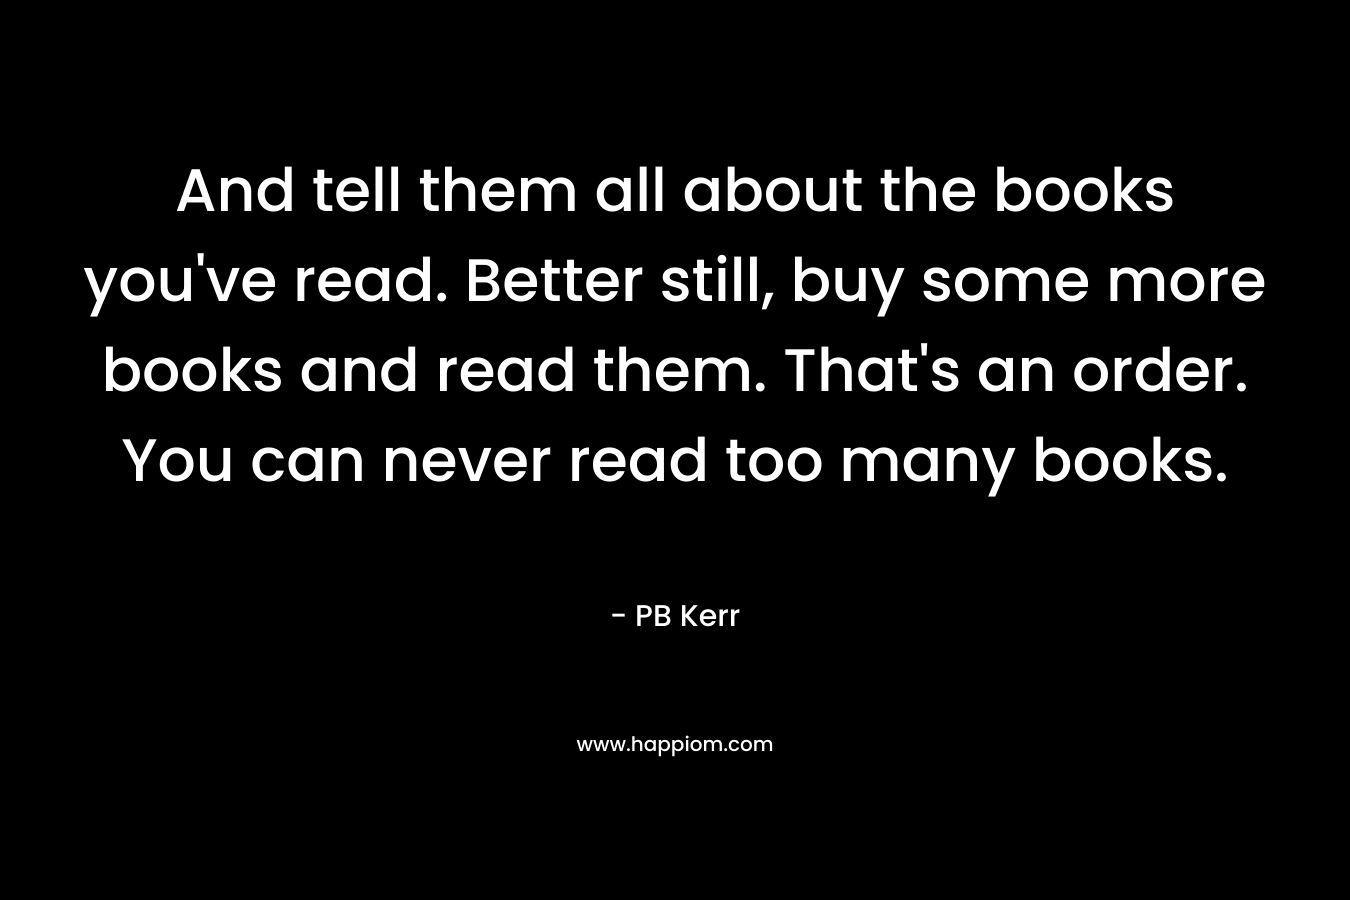 And tell them all about the books you've read. Better still, buy some more books and read them. That's an order. You can never read too many books.